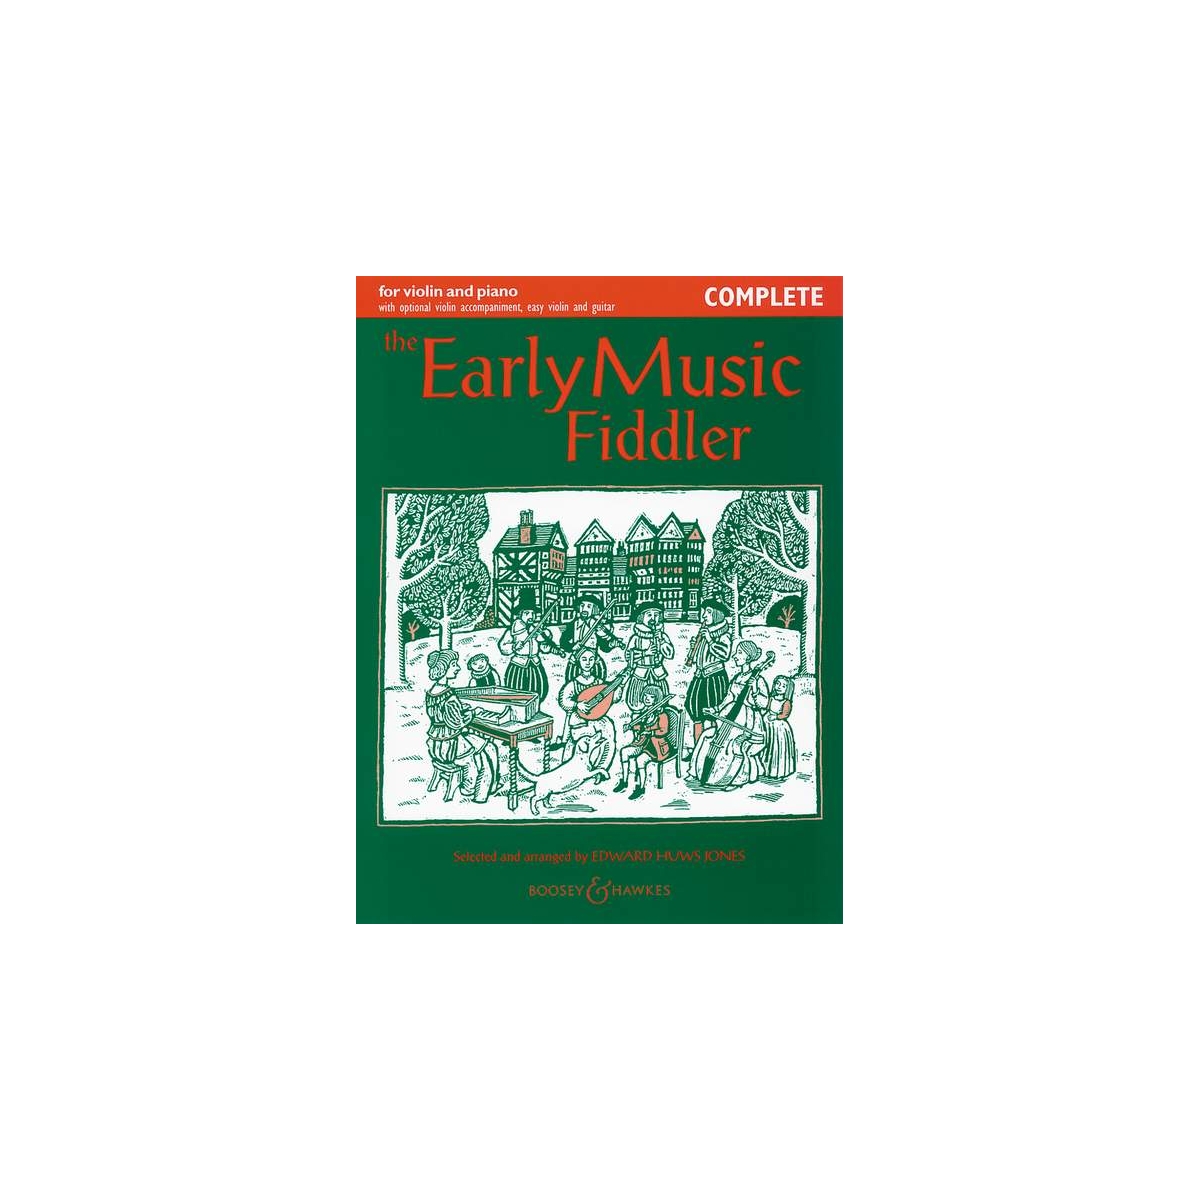 The Early Music Fiddler [Complete]